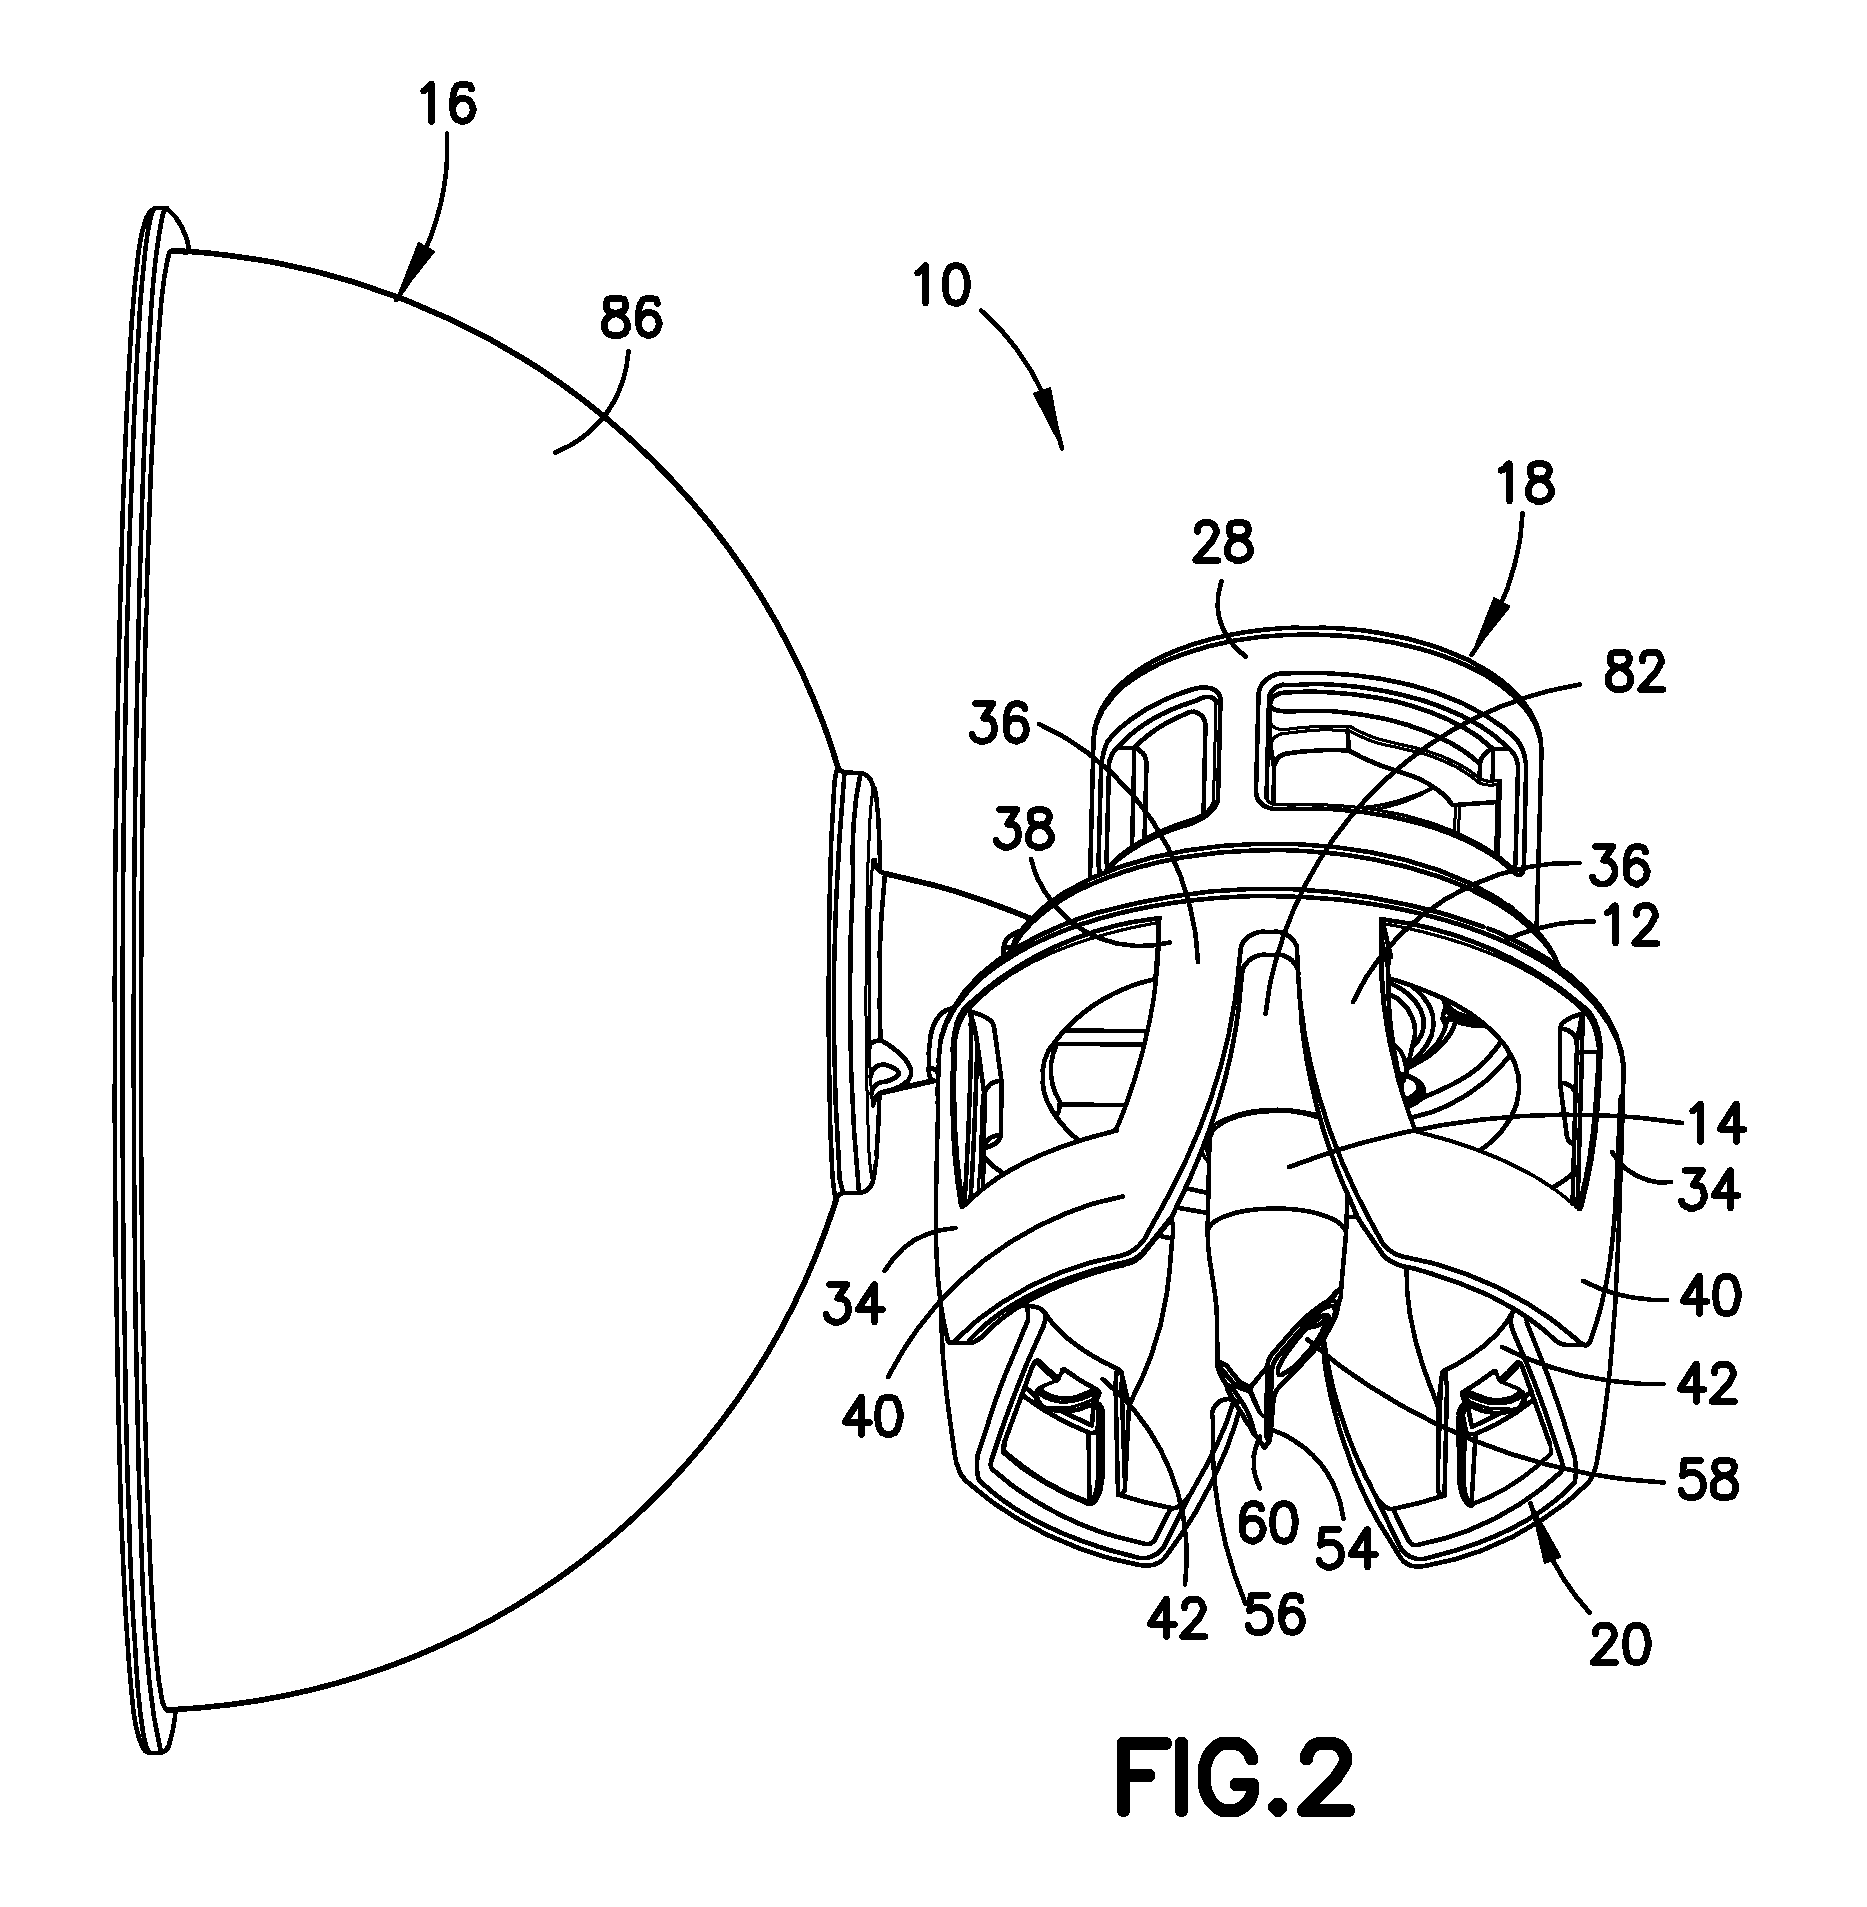 Medical vial access device with pressure equalization and closed drug transfer system and method utilizing same